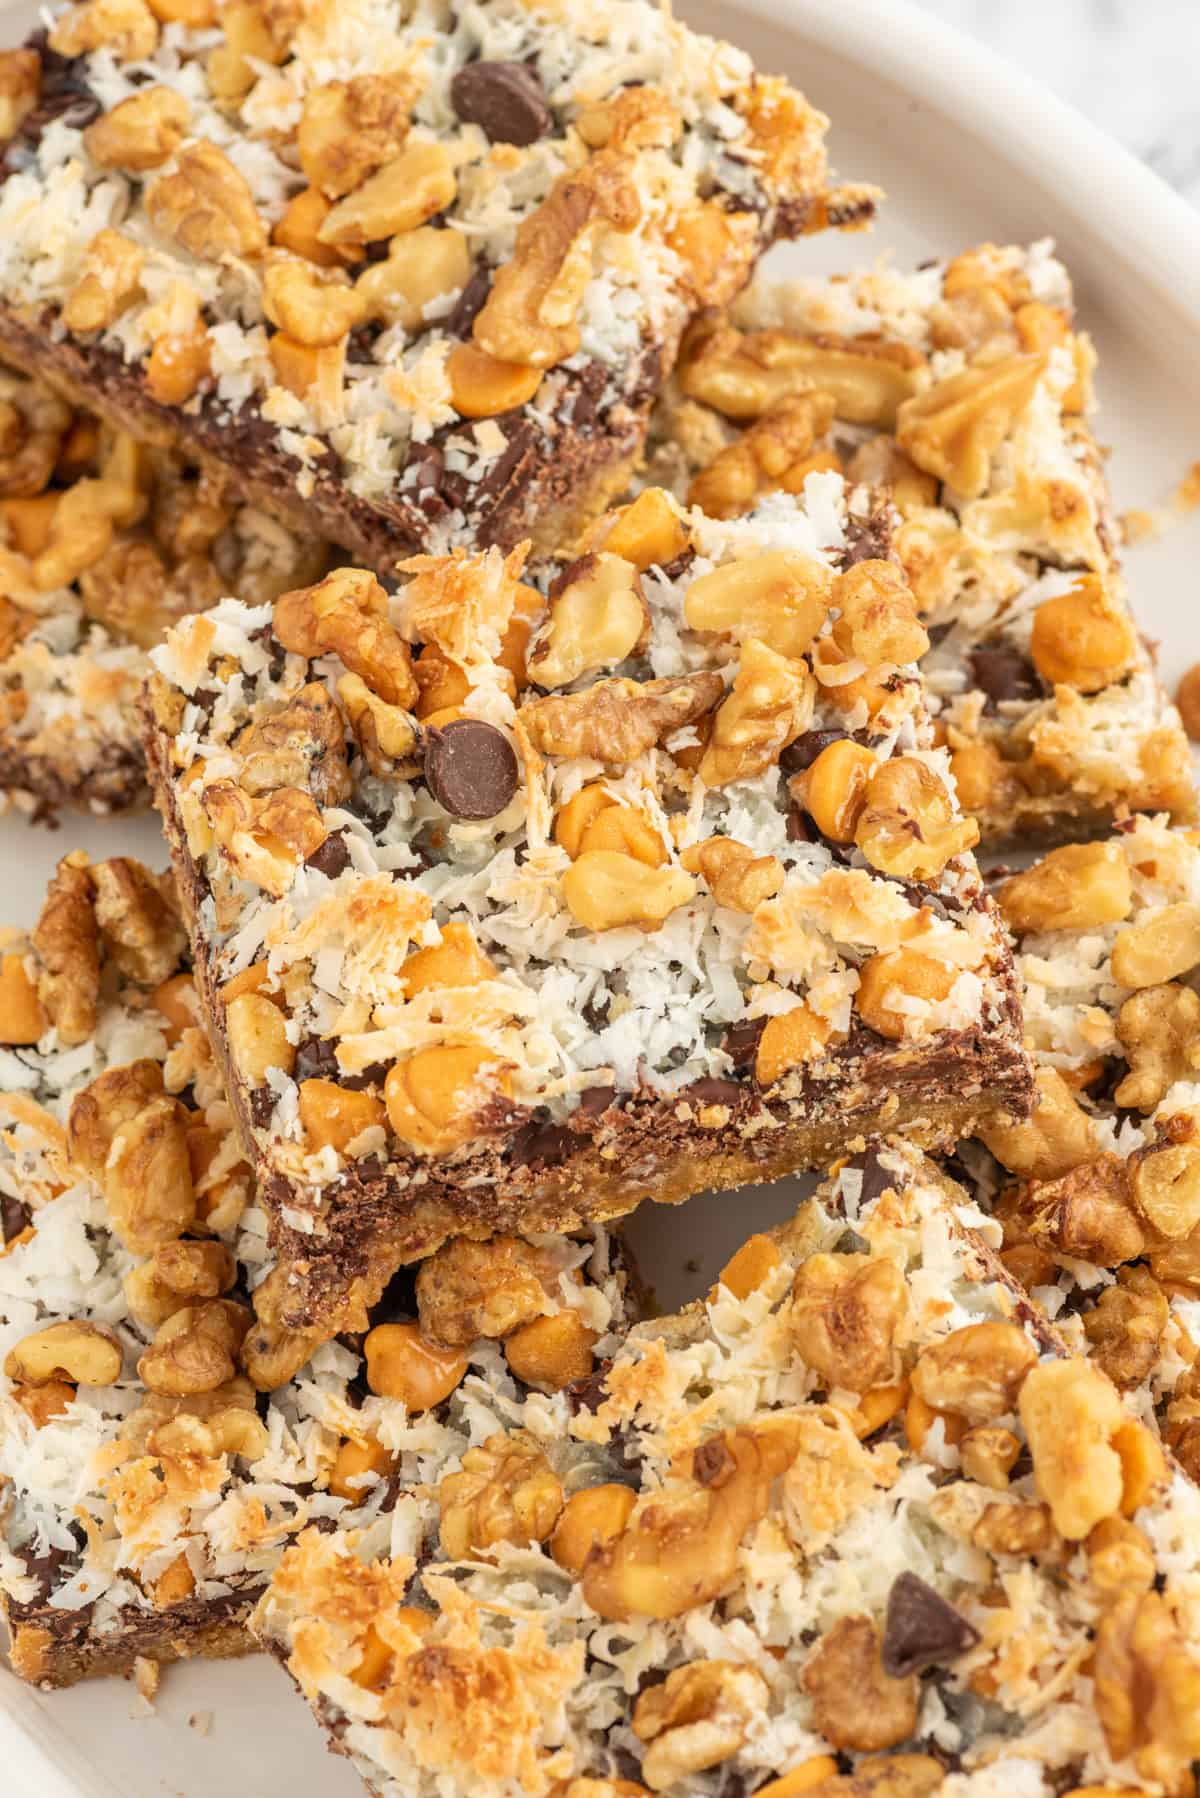 Several magic bars are stacked on top of one another on a serving plate.